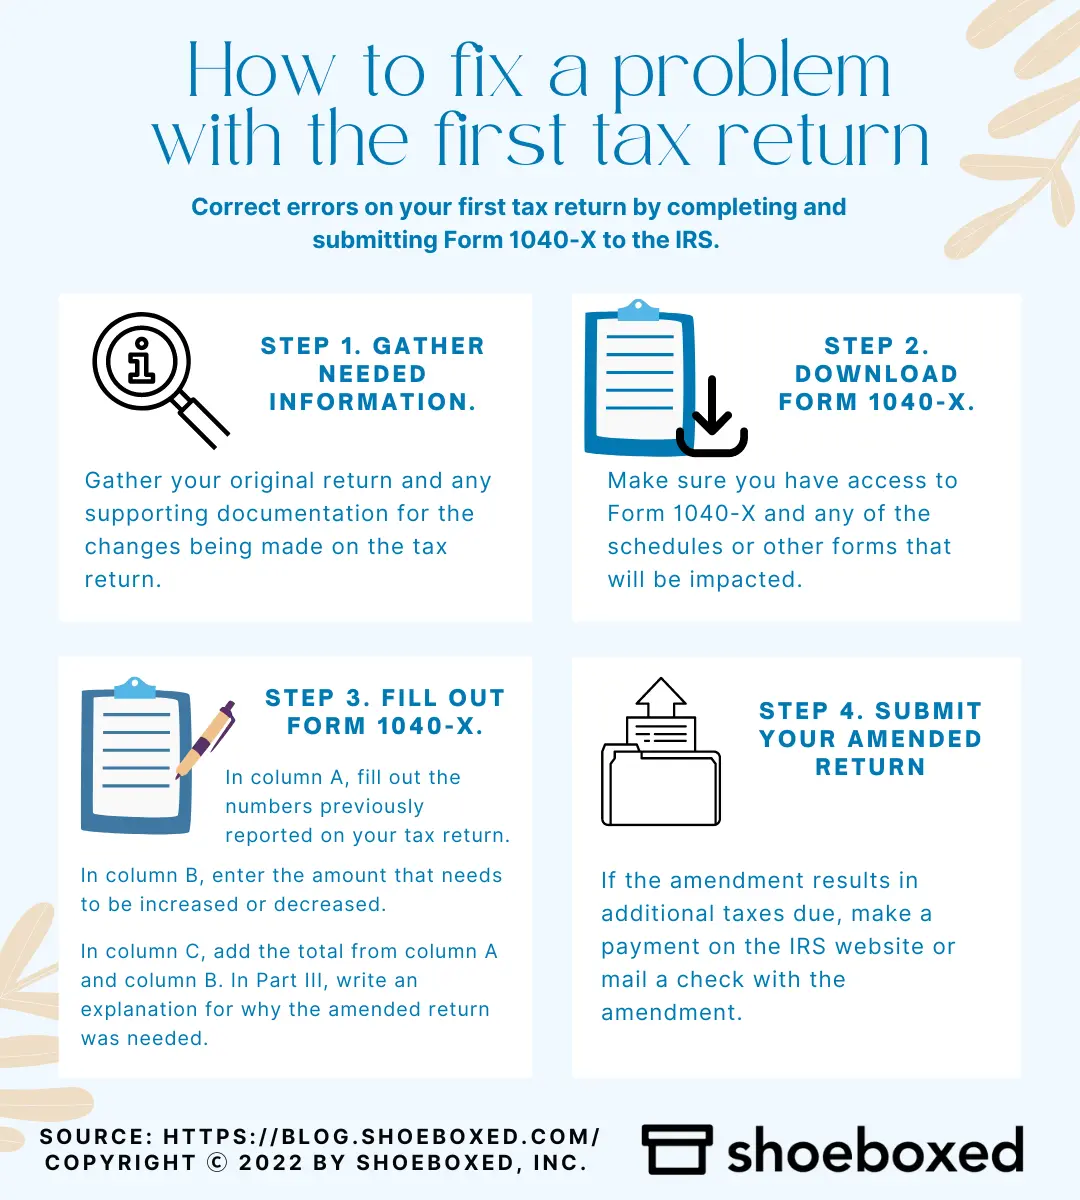 Step-by-step on how to fix a problem with the first tax return